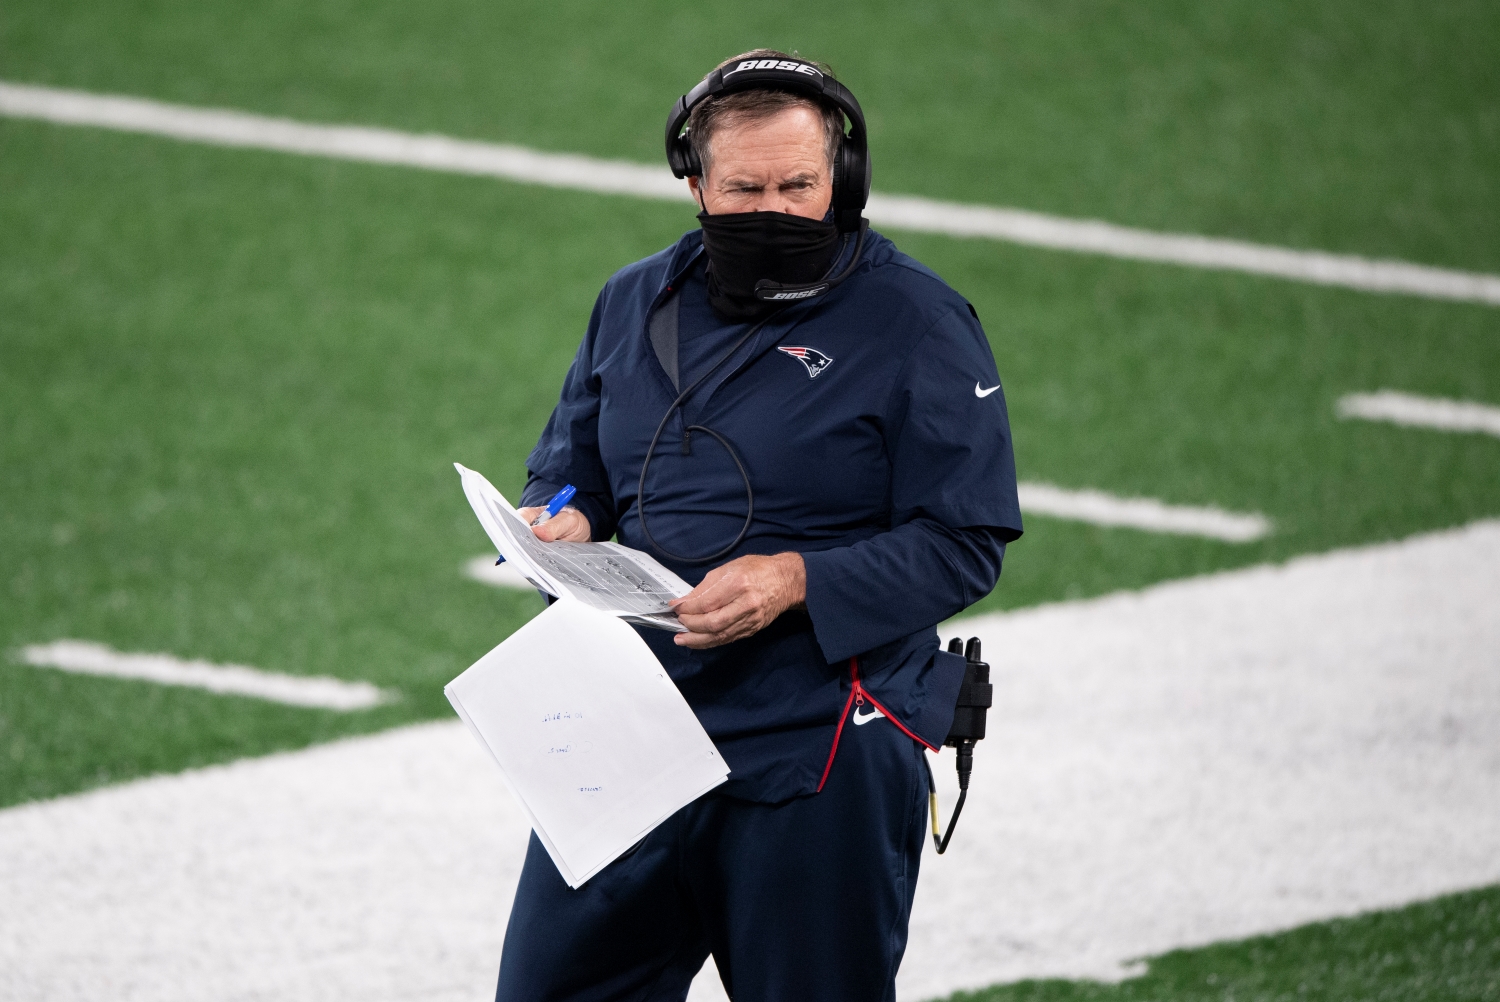 New England Patriots coach Bill Belichick stands on the sideline during a game against the New York Jets during the 2020 NFL season.